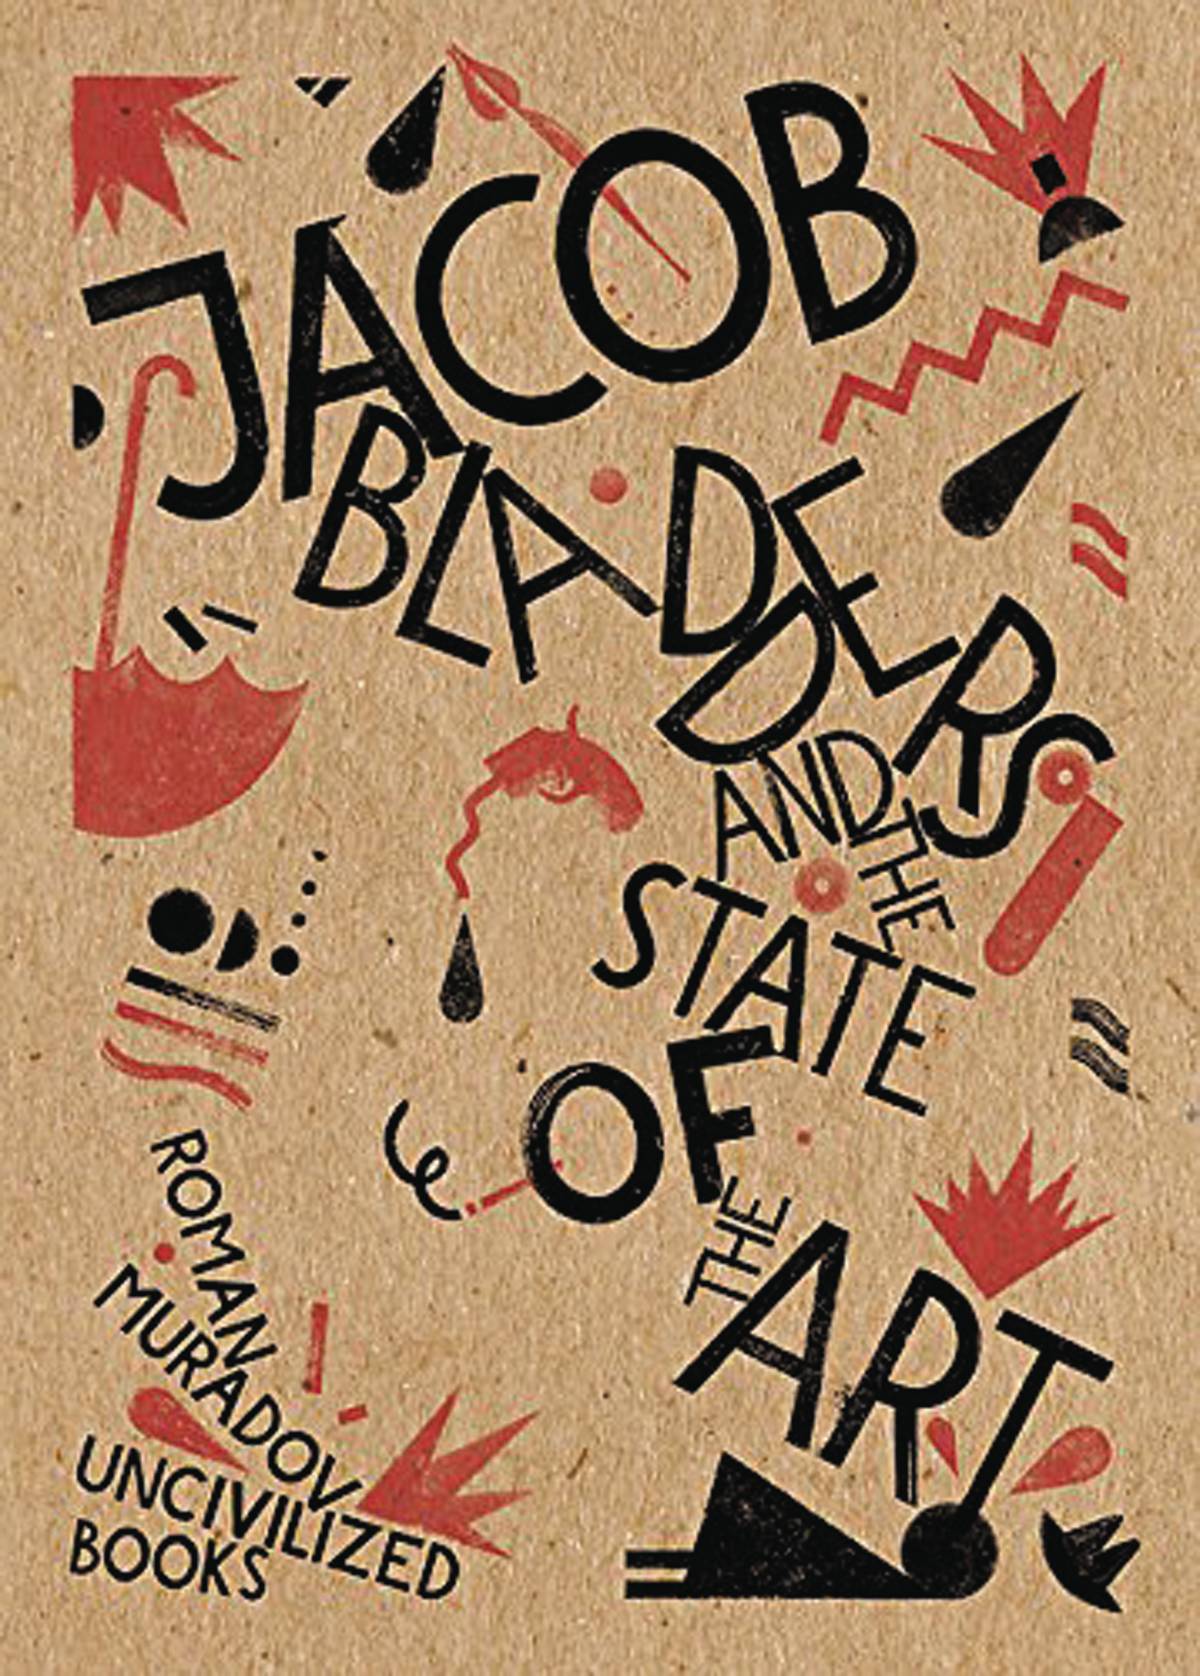 Jacob Bladders And The State of Art